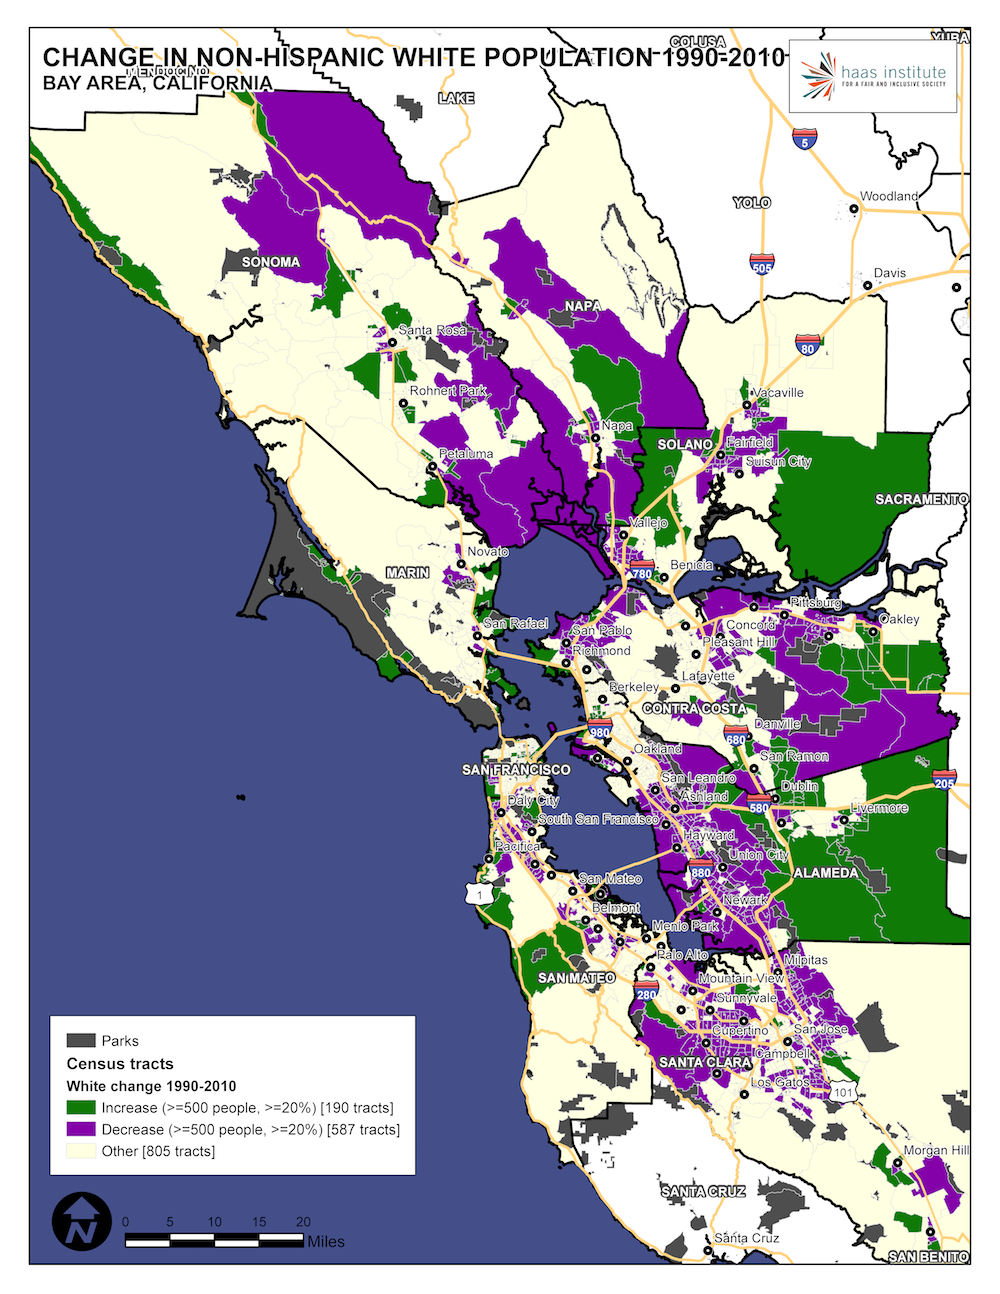 Map shows change in Bay Area white population from 1990 to 2010